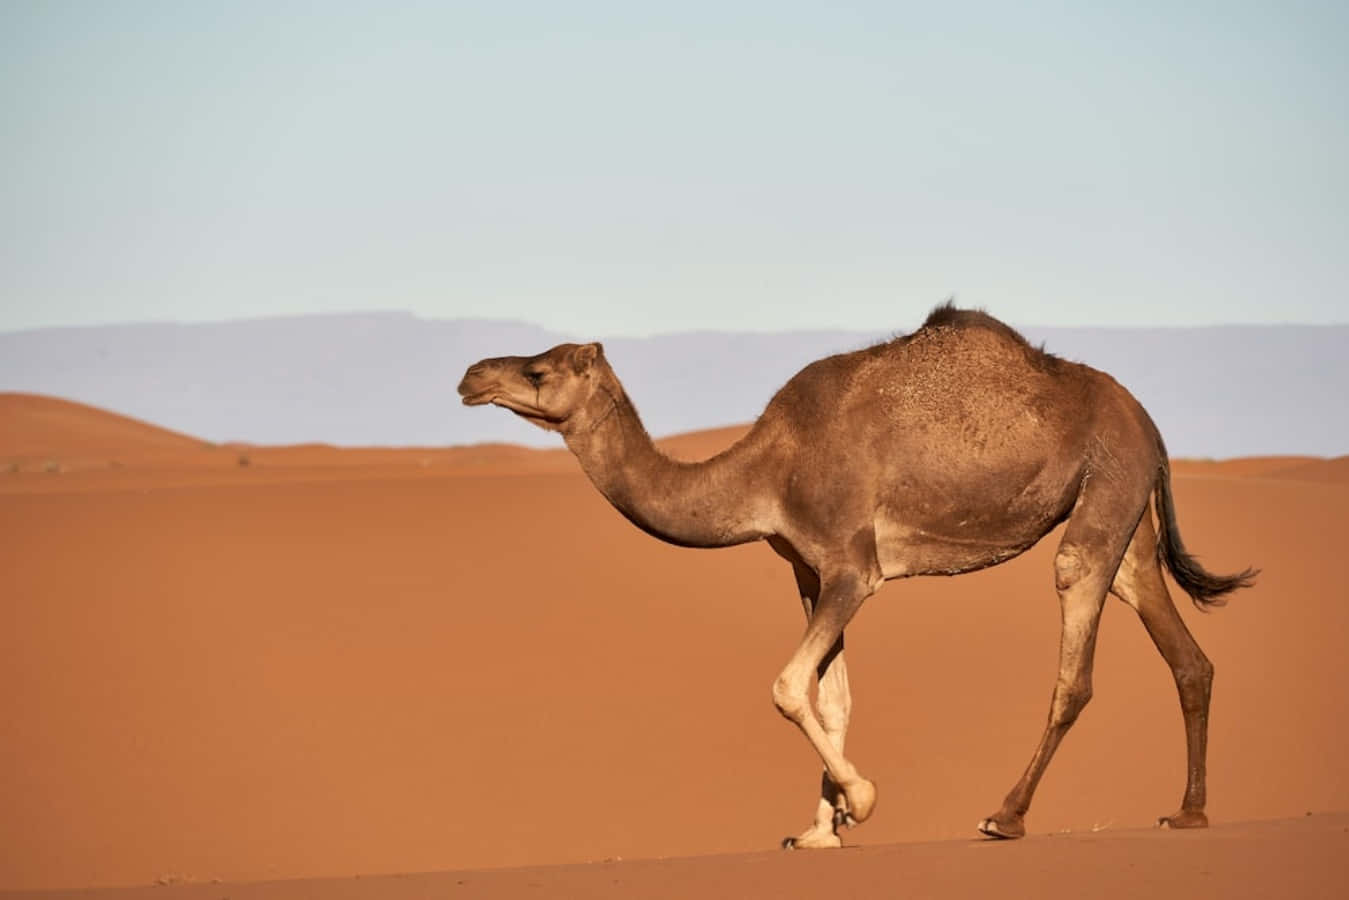 A majestic camel standing atop an ancient dune in the desert